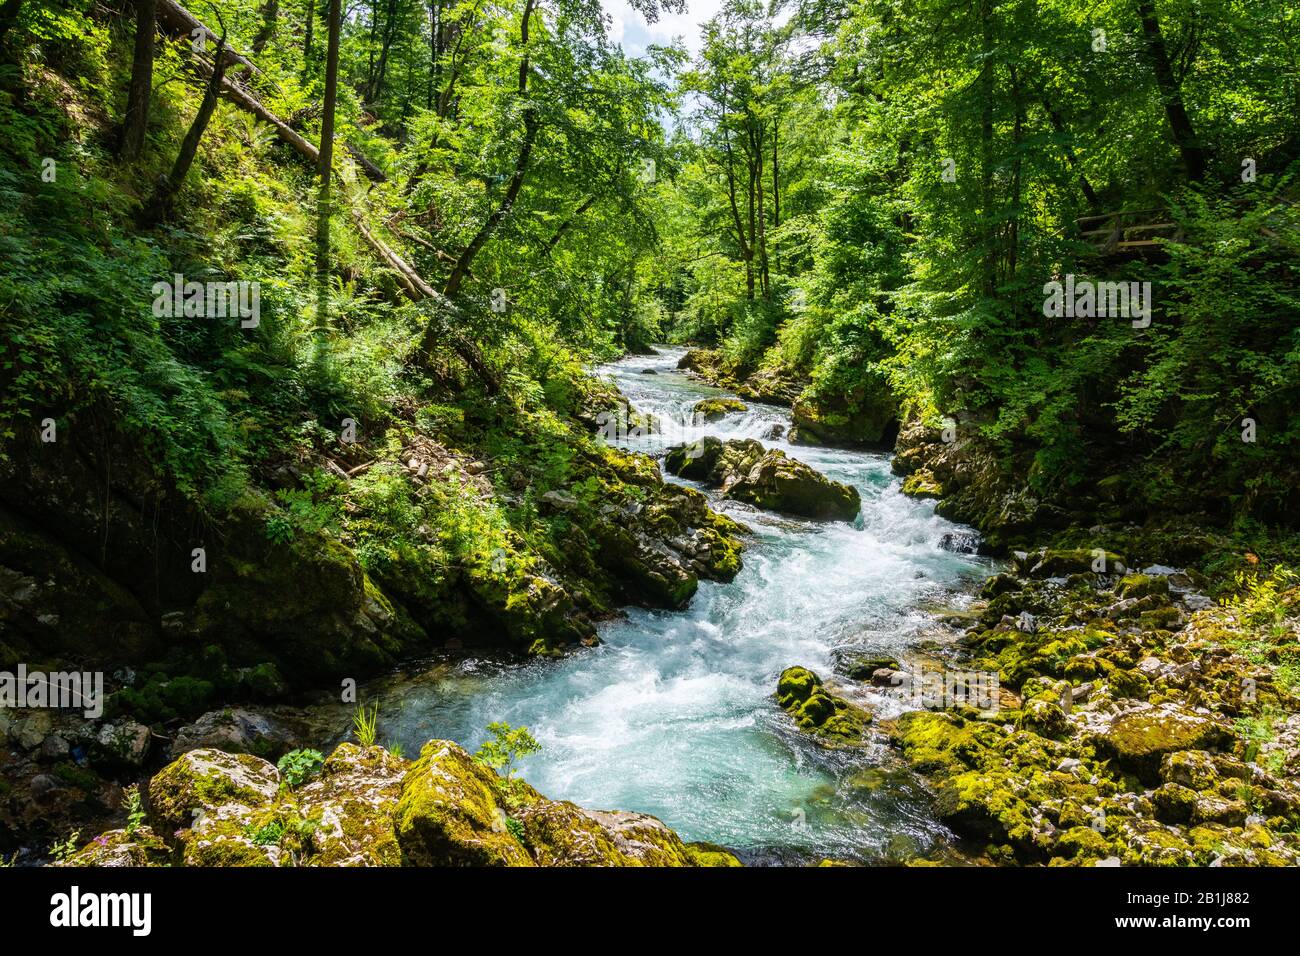 Landscape in Vintgar Gorge (Soteska Vintgar) near Bled town in Slovenia. Carved by the Radovna River, it is the continuation of the Radovna Valley. Stock Photo